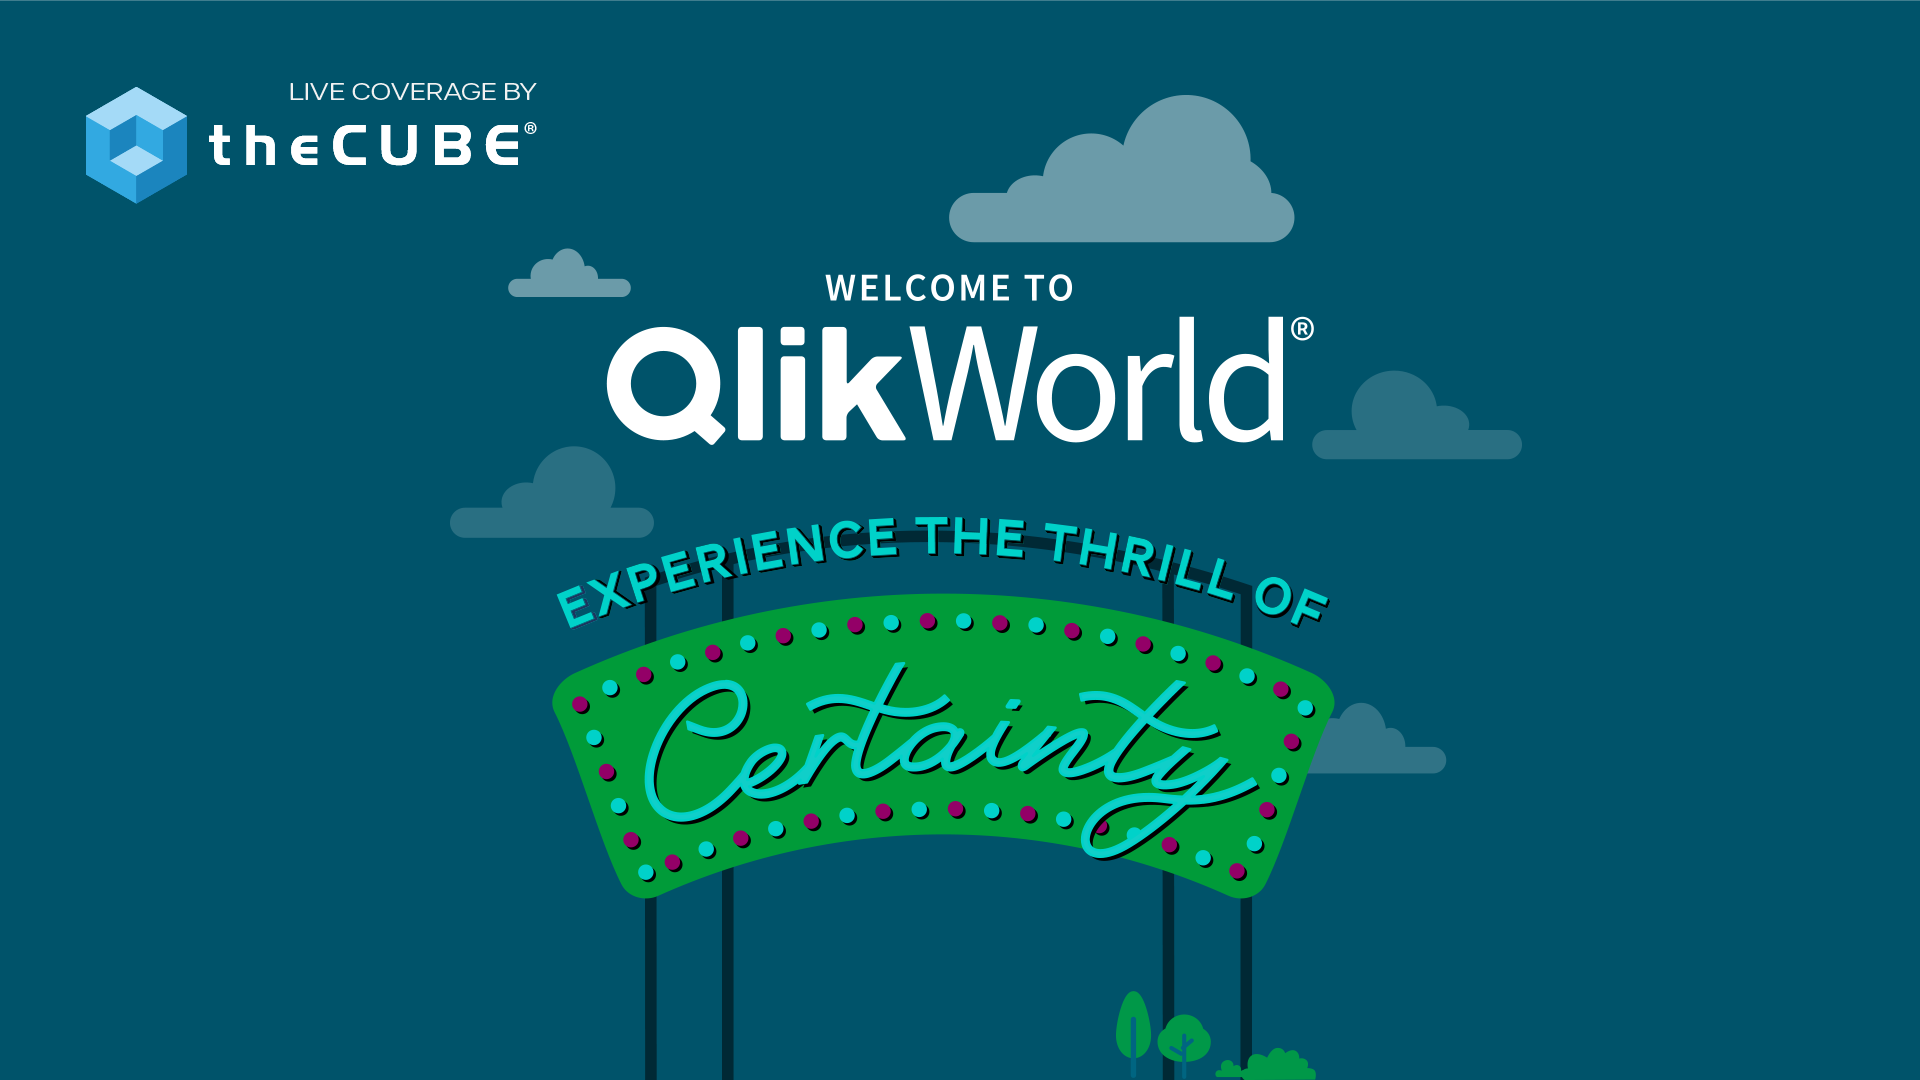 Banner containing the words "Welcome to QlikWorld - Experience the thrill of certainty' with clouds in the background